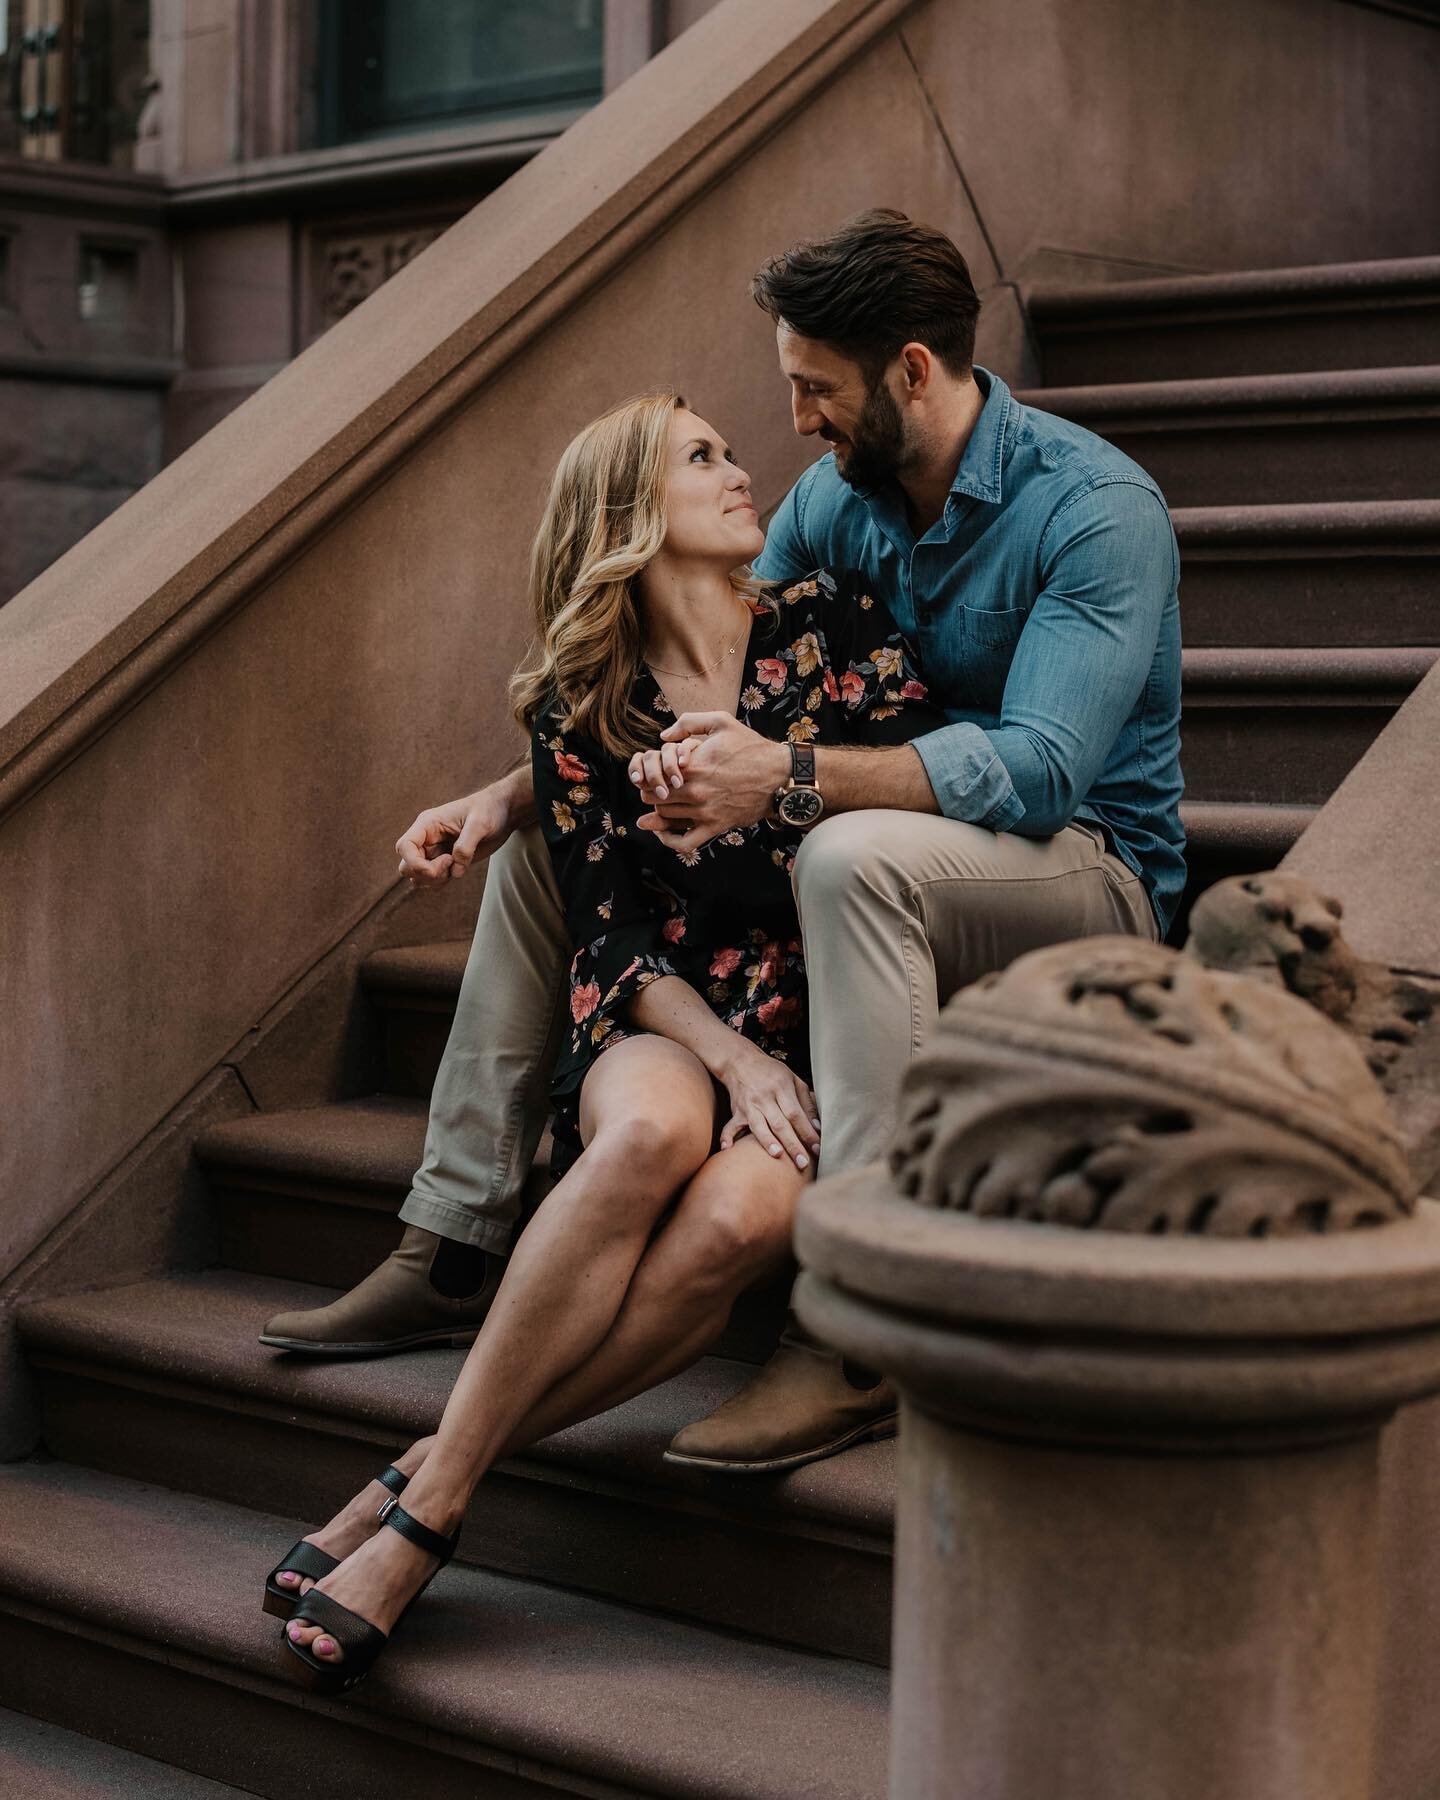 &ldquo;You want the moon? Just say the word, and I&rsquo;ll throw a lasso around it and pull it down.&rdquo;
:
Tay + Adam | NYC |
Engagement Session 
:
#junebugweddings #elopementcollective #vscocam #risingtidesociety #heyheyhellomay #fpme #magnoliar